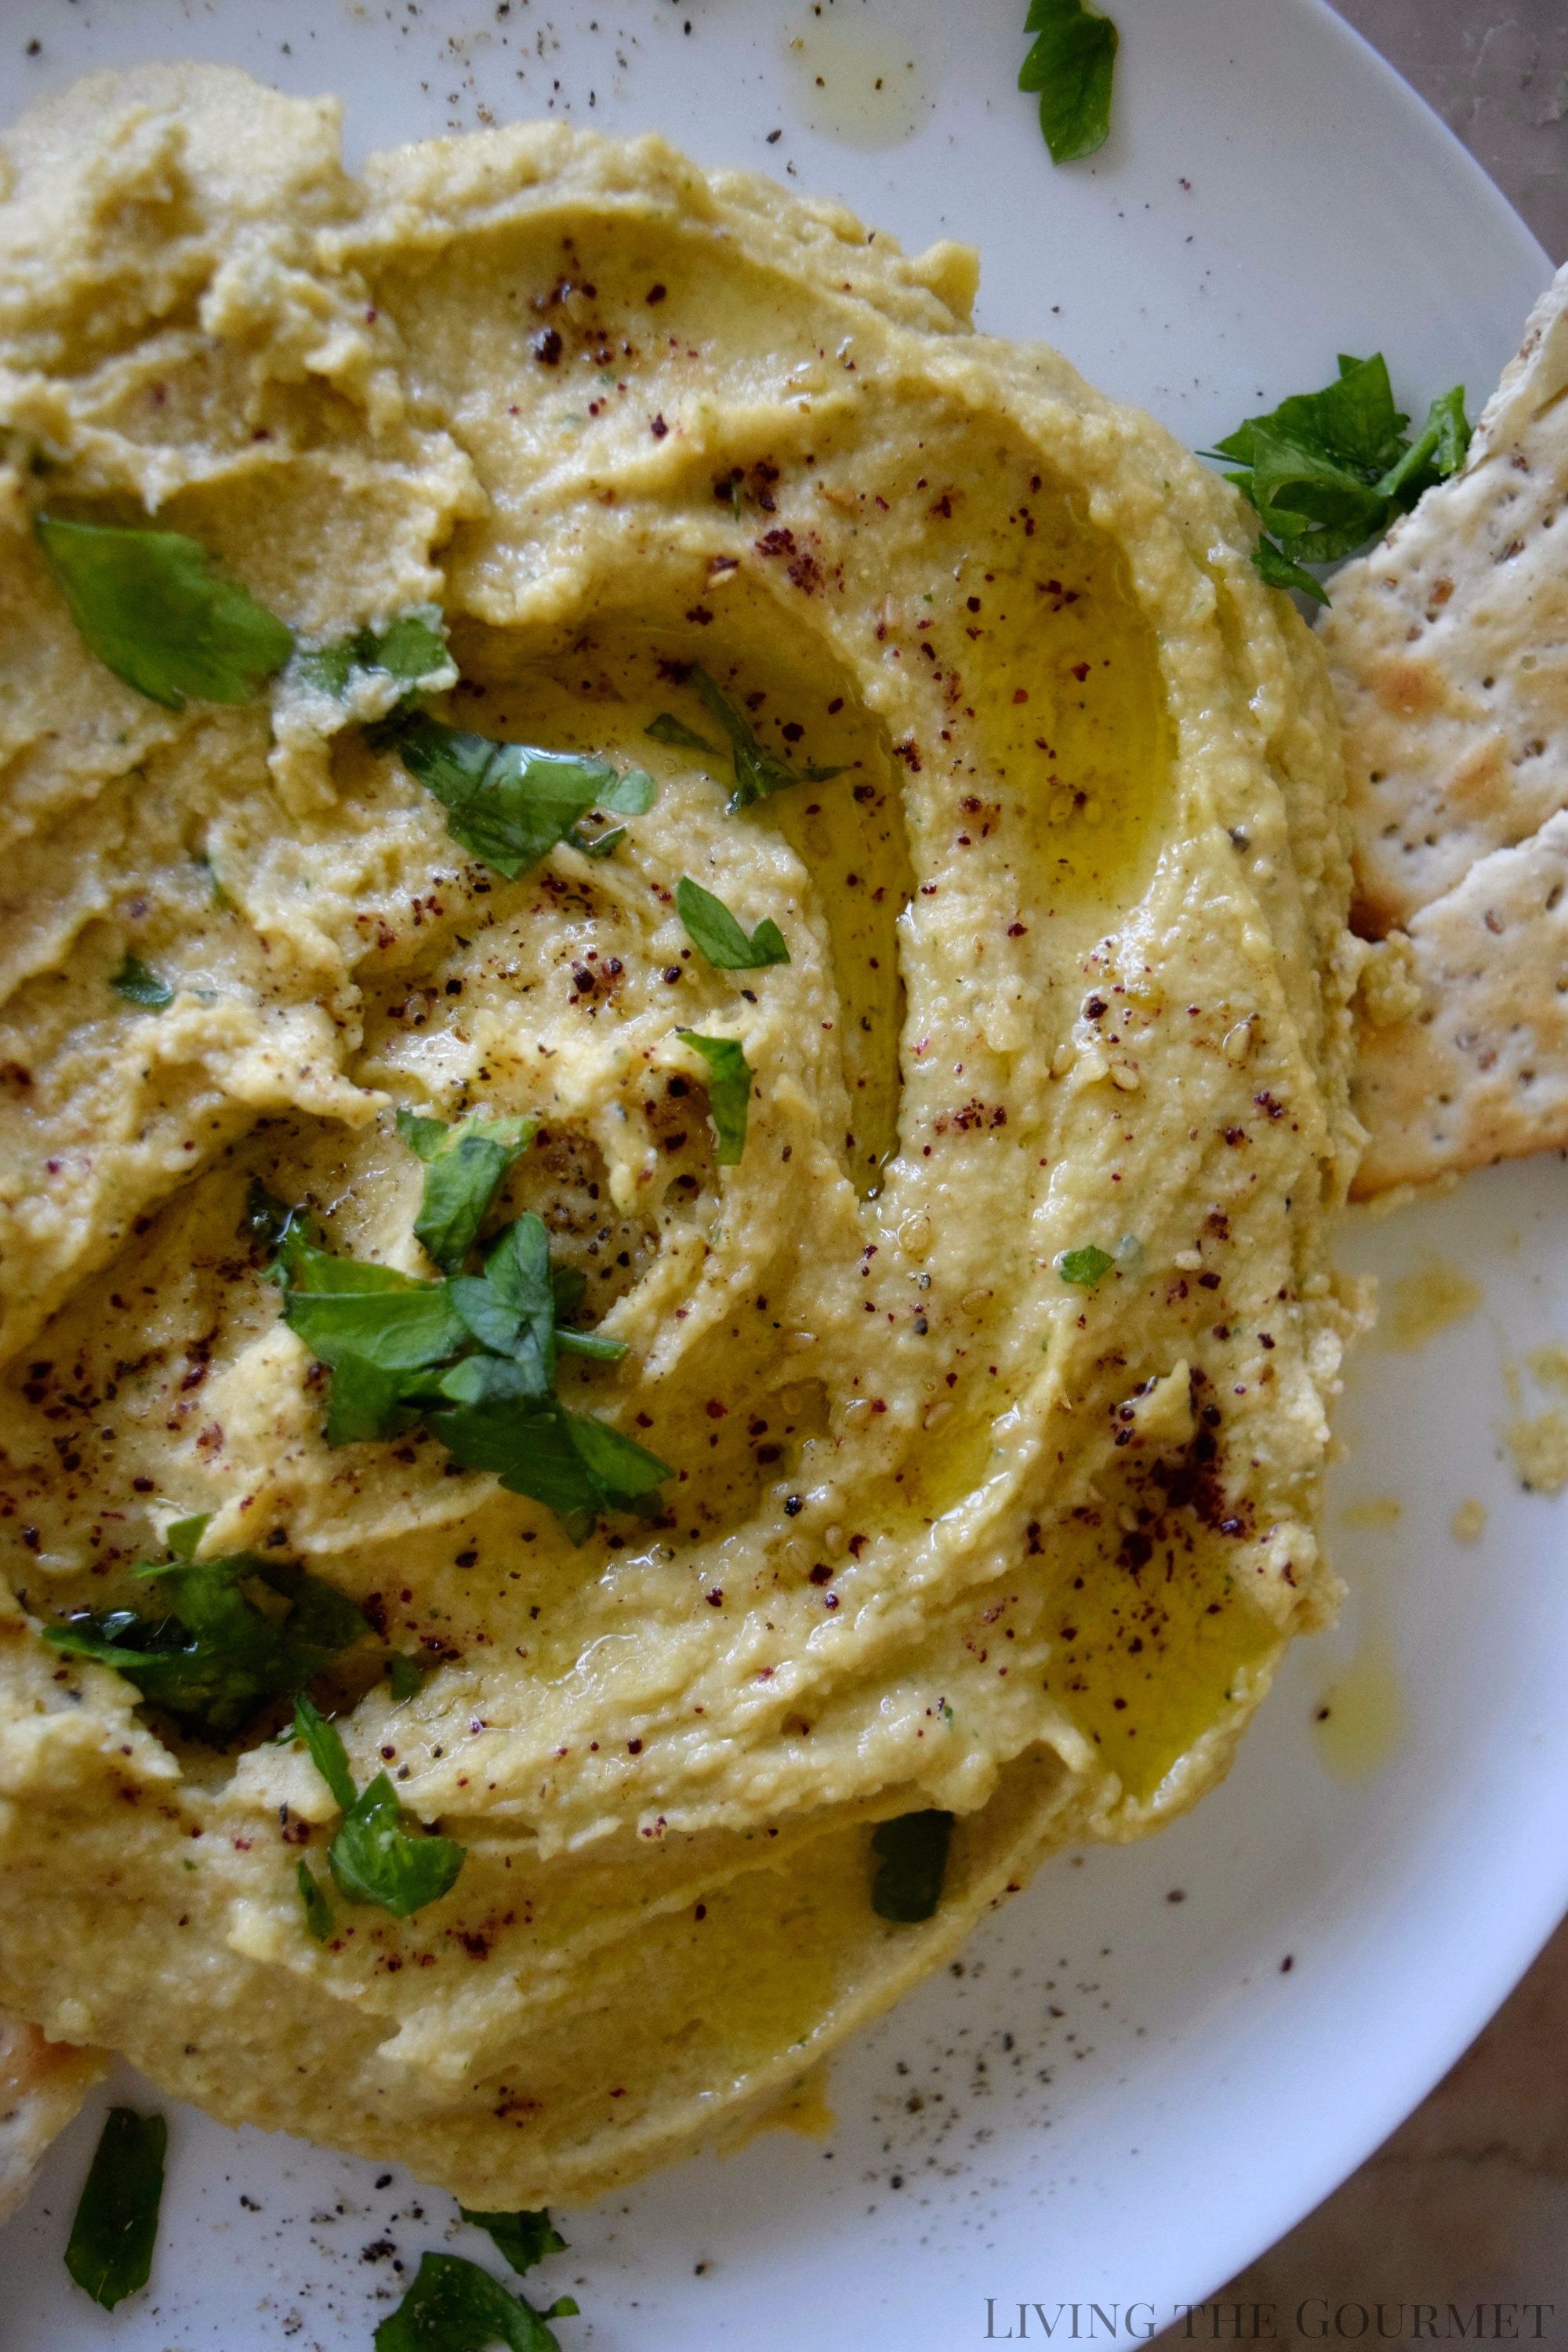 Living the Gourmet: Hummus is one of the healthiest and easiest recipes ...